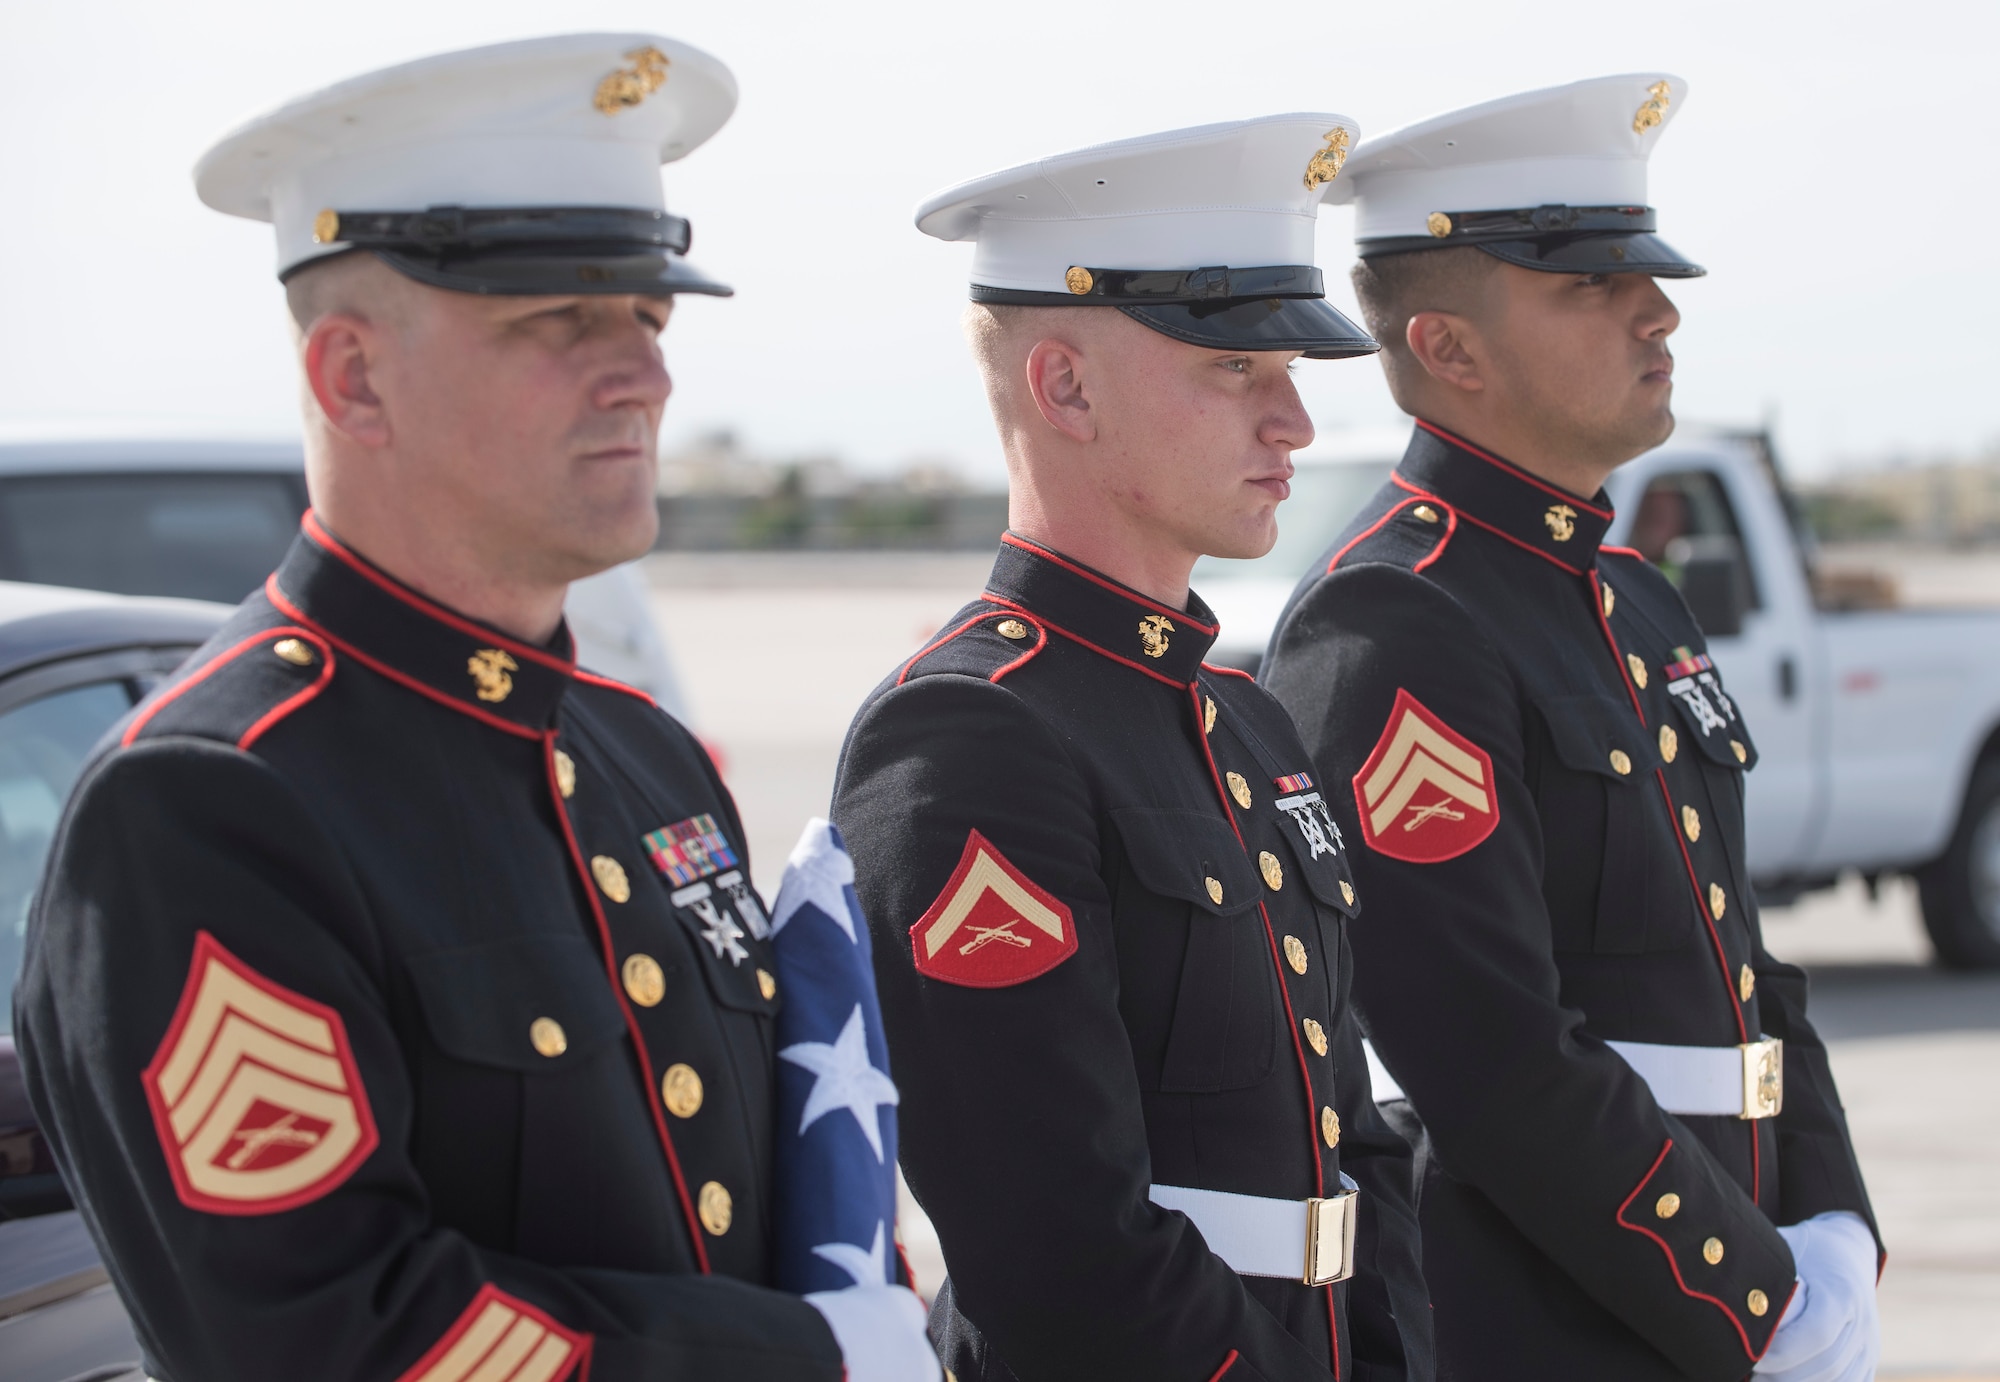 U.S. Marine Staff Sgt. Robert Martin, 6th Engineer Support Battalion Bulk Fuel Company Charlie, Site Support Phoenix maintenance chief (left), Lance Cpl. Kyle Pierce and Cpl. Tristan Garivay (right), Alpha Company administrative specialists, Headquarters and Support Battalion, Marine Corps Installations East, stand ready to receive a dignified transfer May 17, 2019, at the Phoenix Sky Harbor International Airport, Ariz.